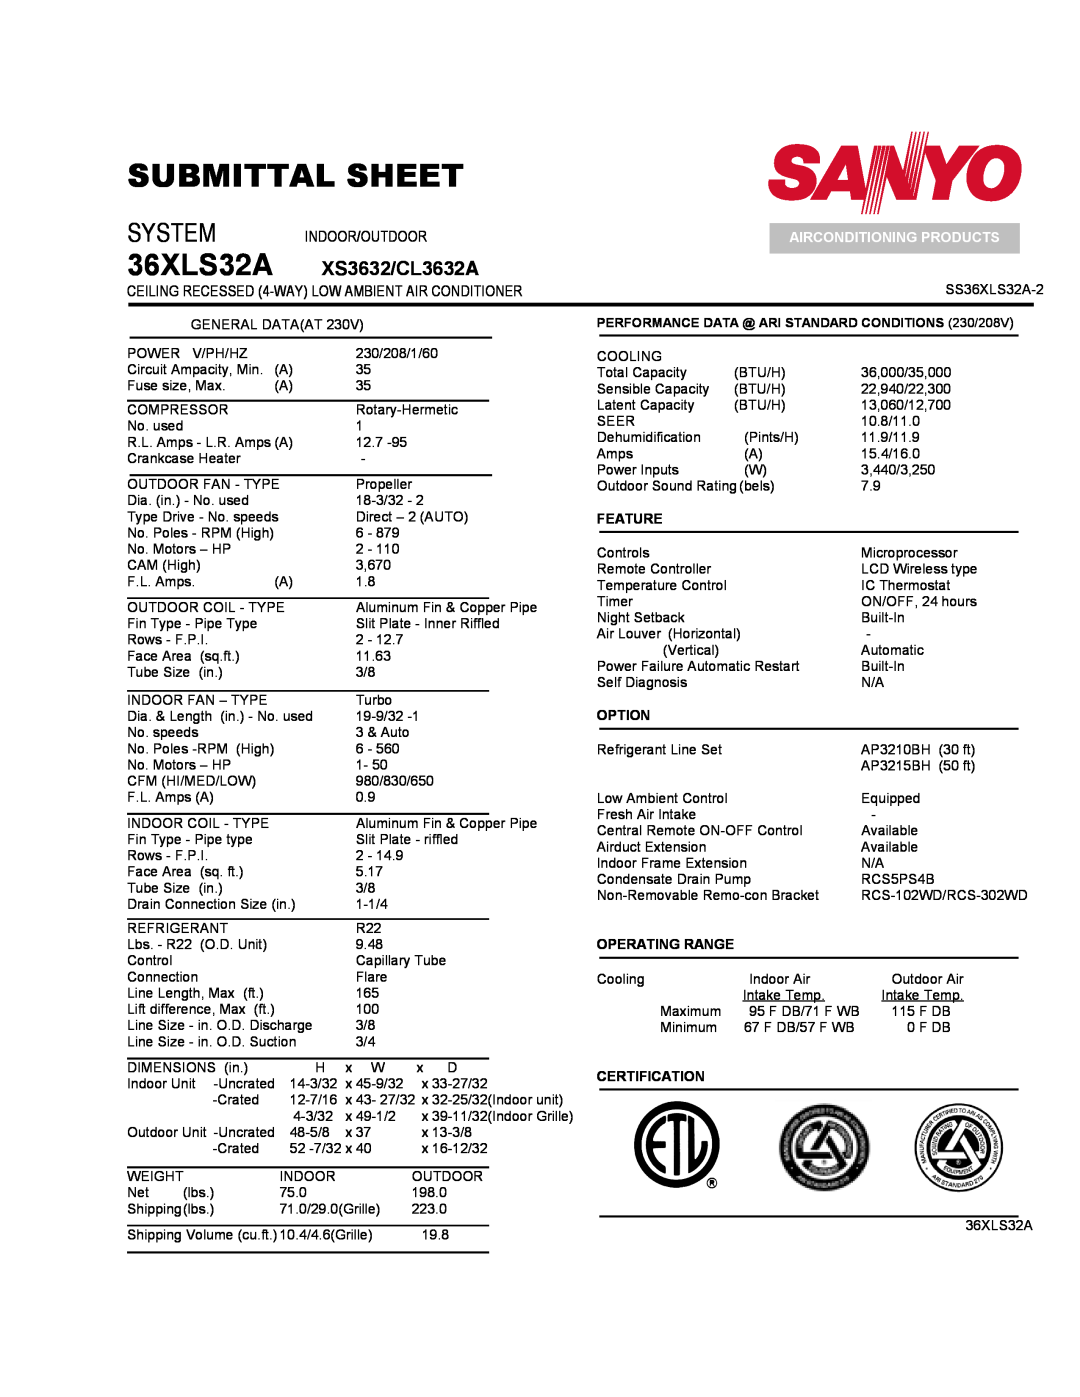 Sanyo 36XLS32A XS3632/CL3632A, System Indoor/Outdoor, CEILING RECESSED 4-WAYLOW AMBIENT AIR CONDITIONER, Feature 